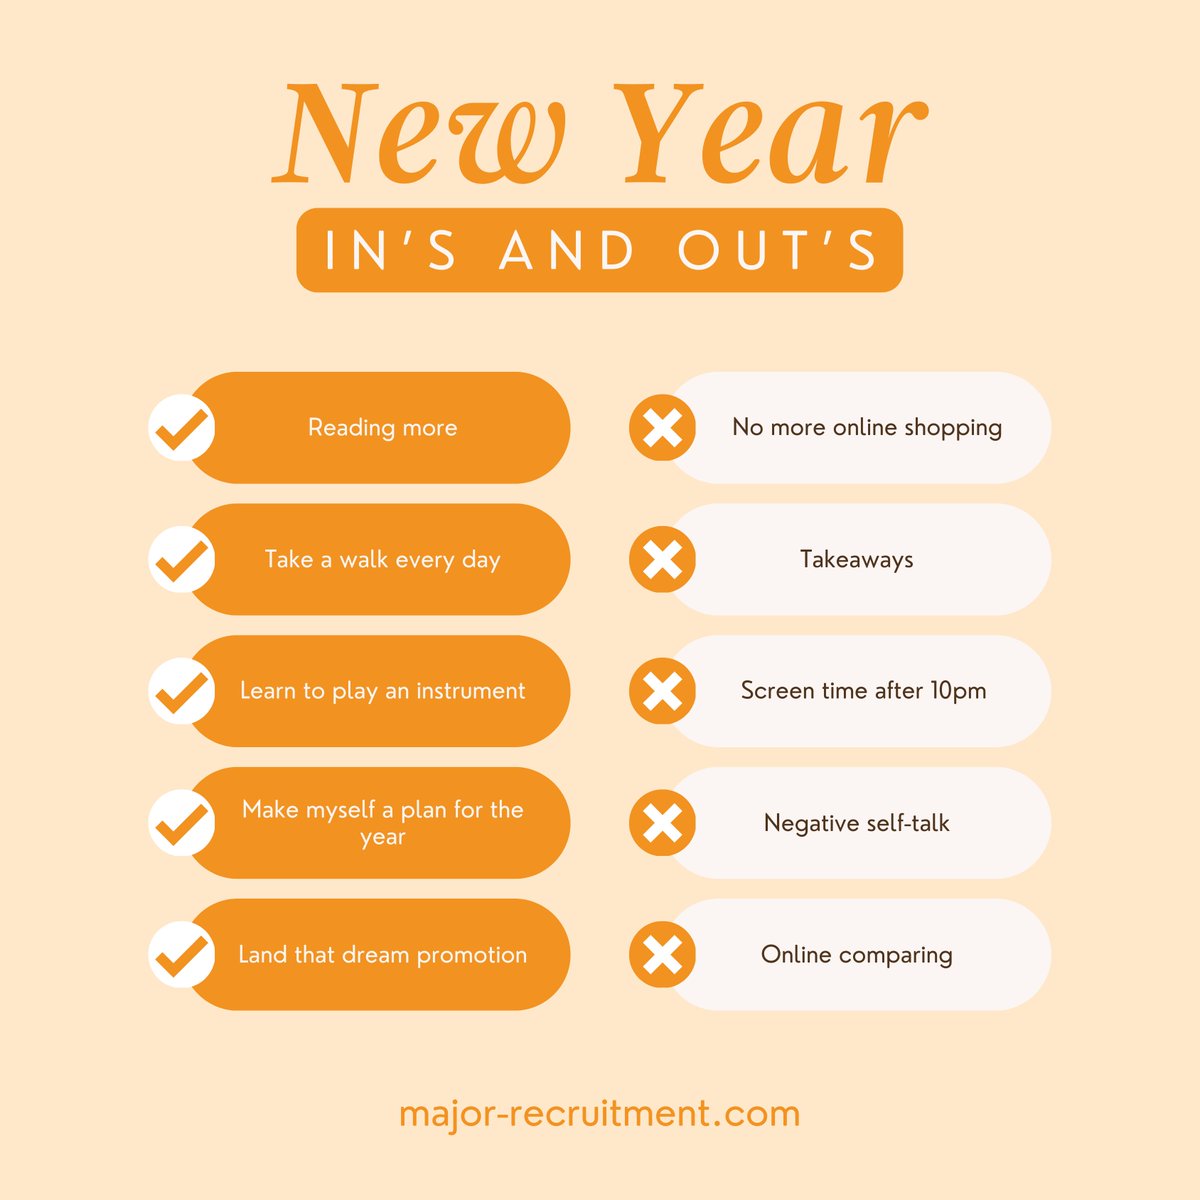 Have you made an ins and outs list for the New Year? Give us one of your In's and one Out for the coming year #newyear #insandouts #NewYear2024